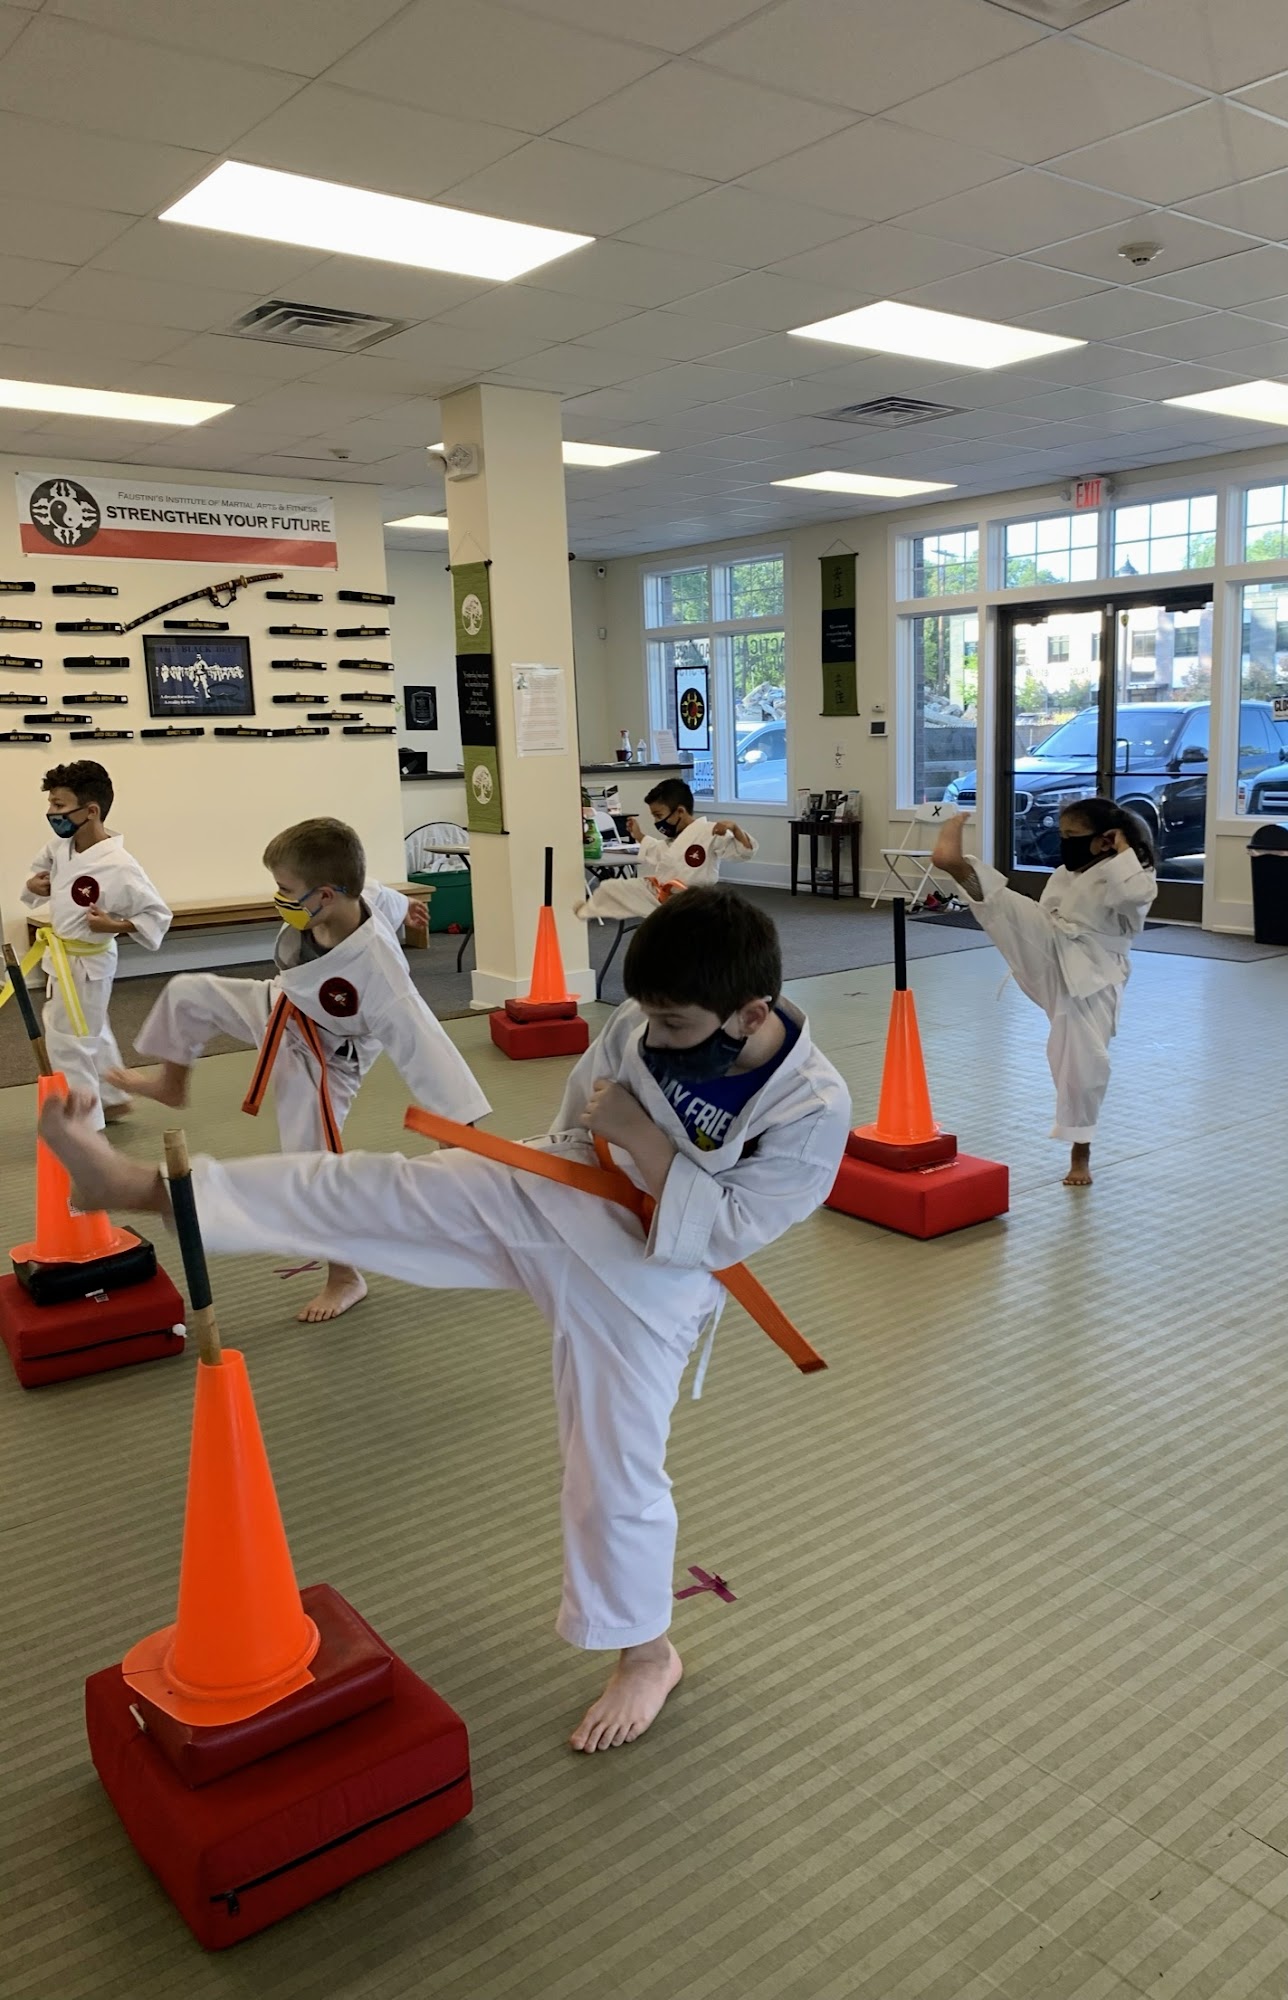 Faustini's Institute of Martial Arts and Fitness 200 Kinderkamack Rd, Emerson New Jersey 07630